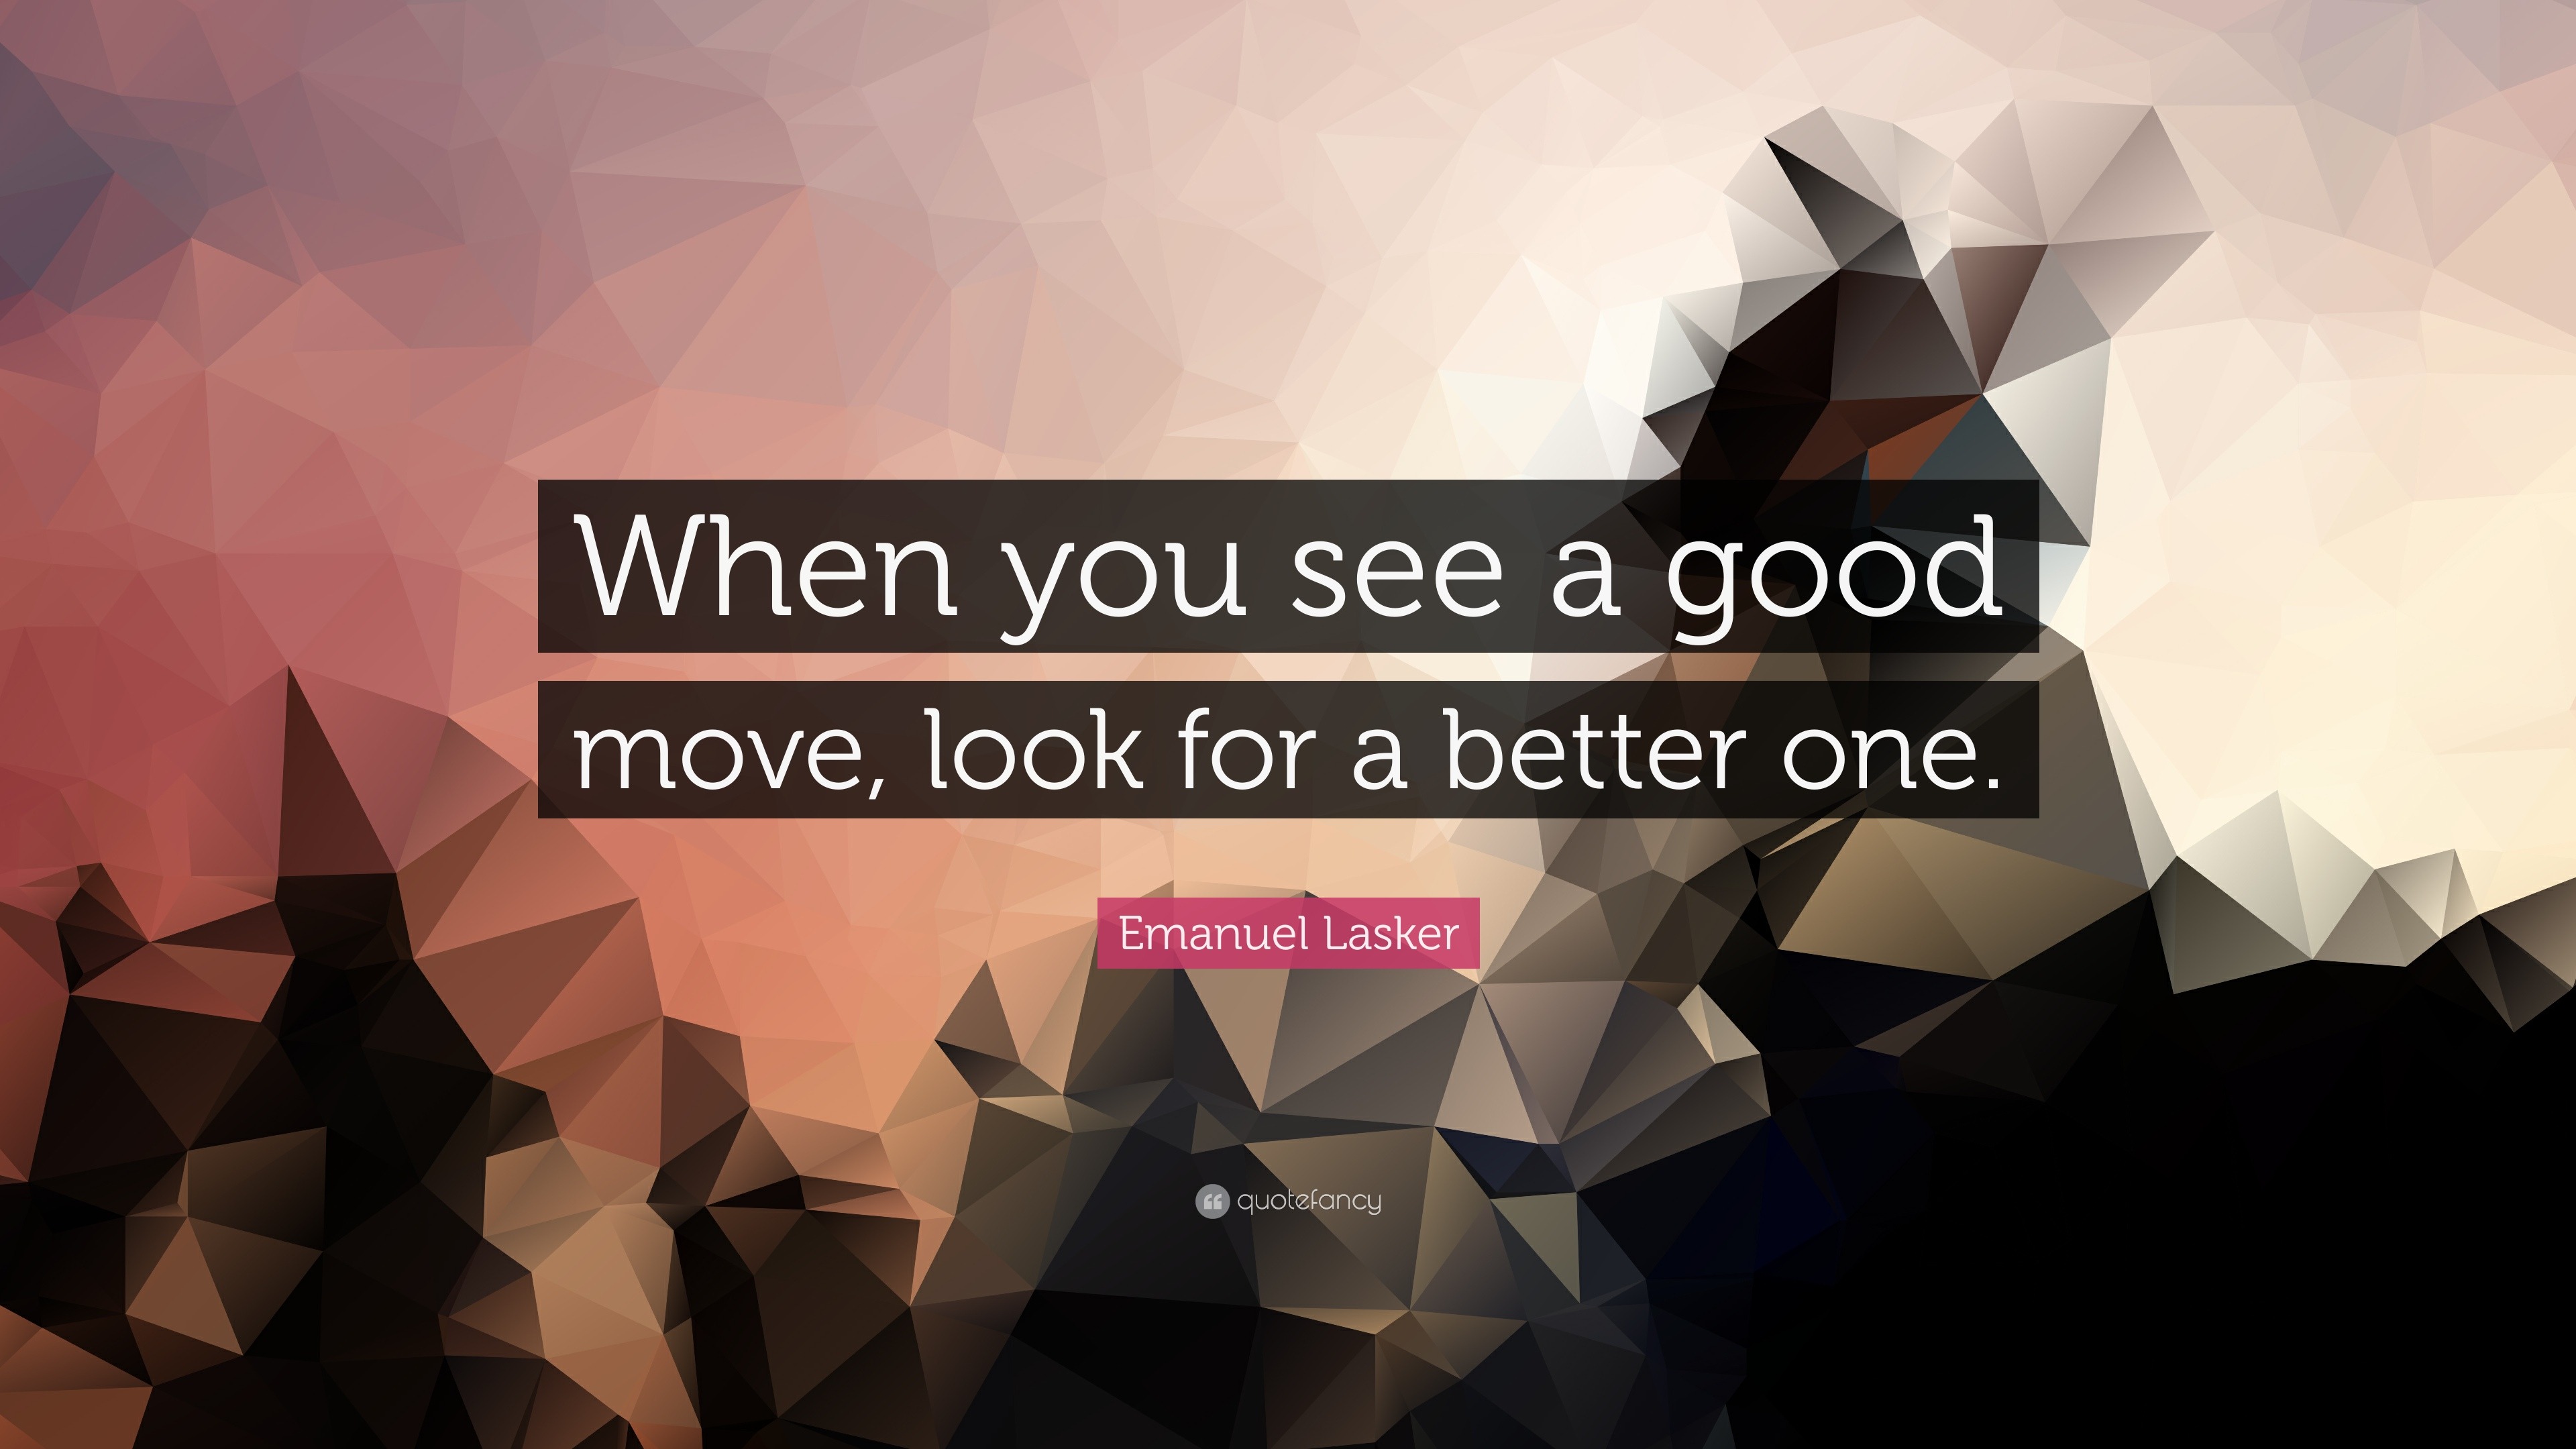 https://quotefancy.com/media/wallpaper/3840x2160/1206107-Emanuel-Lasker-Quote-When-you-see-a-good-move-look-for-a-better.jpg